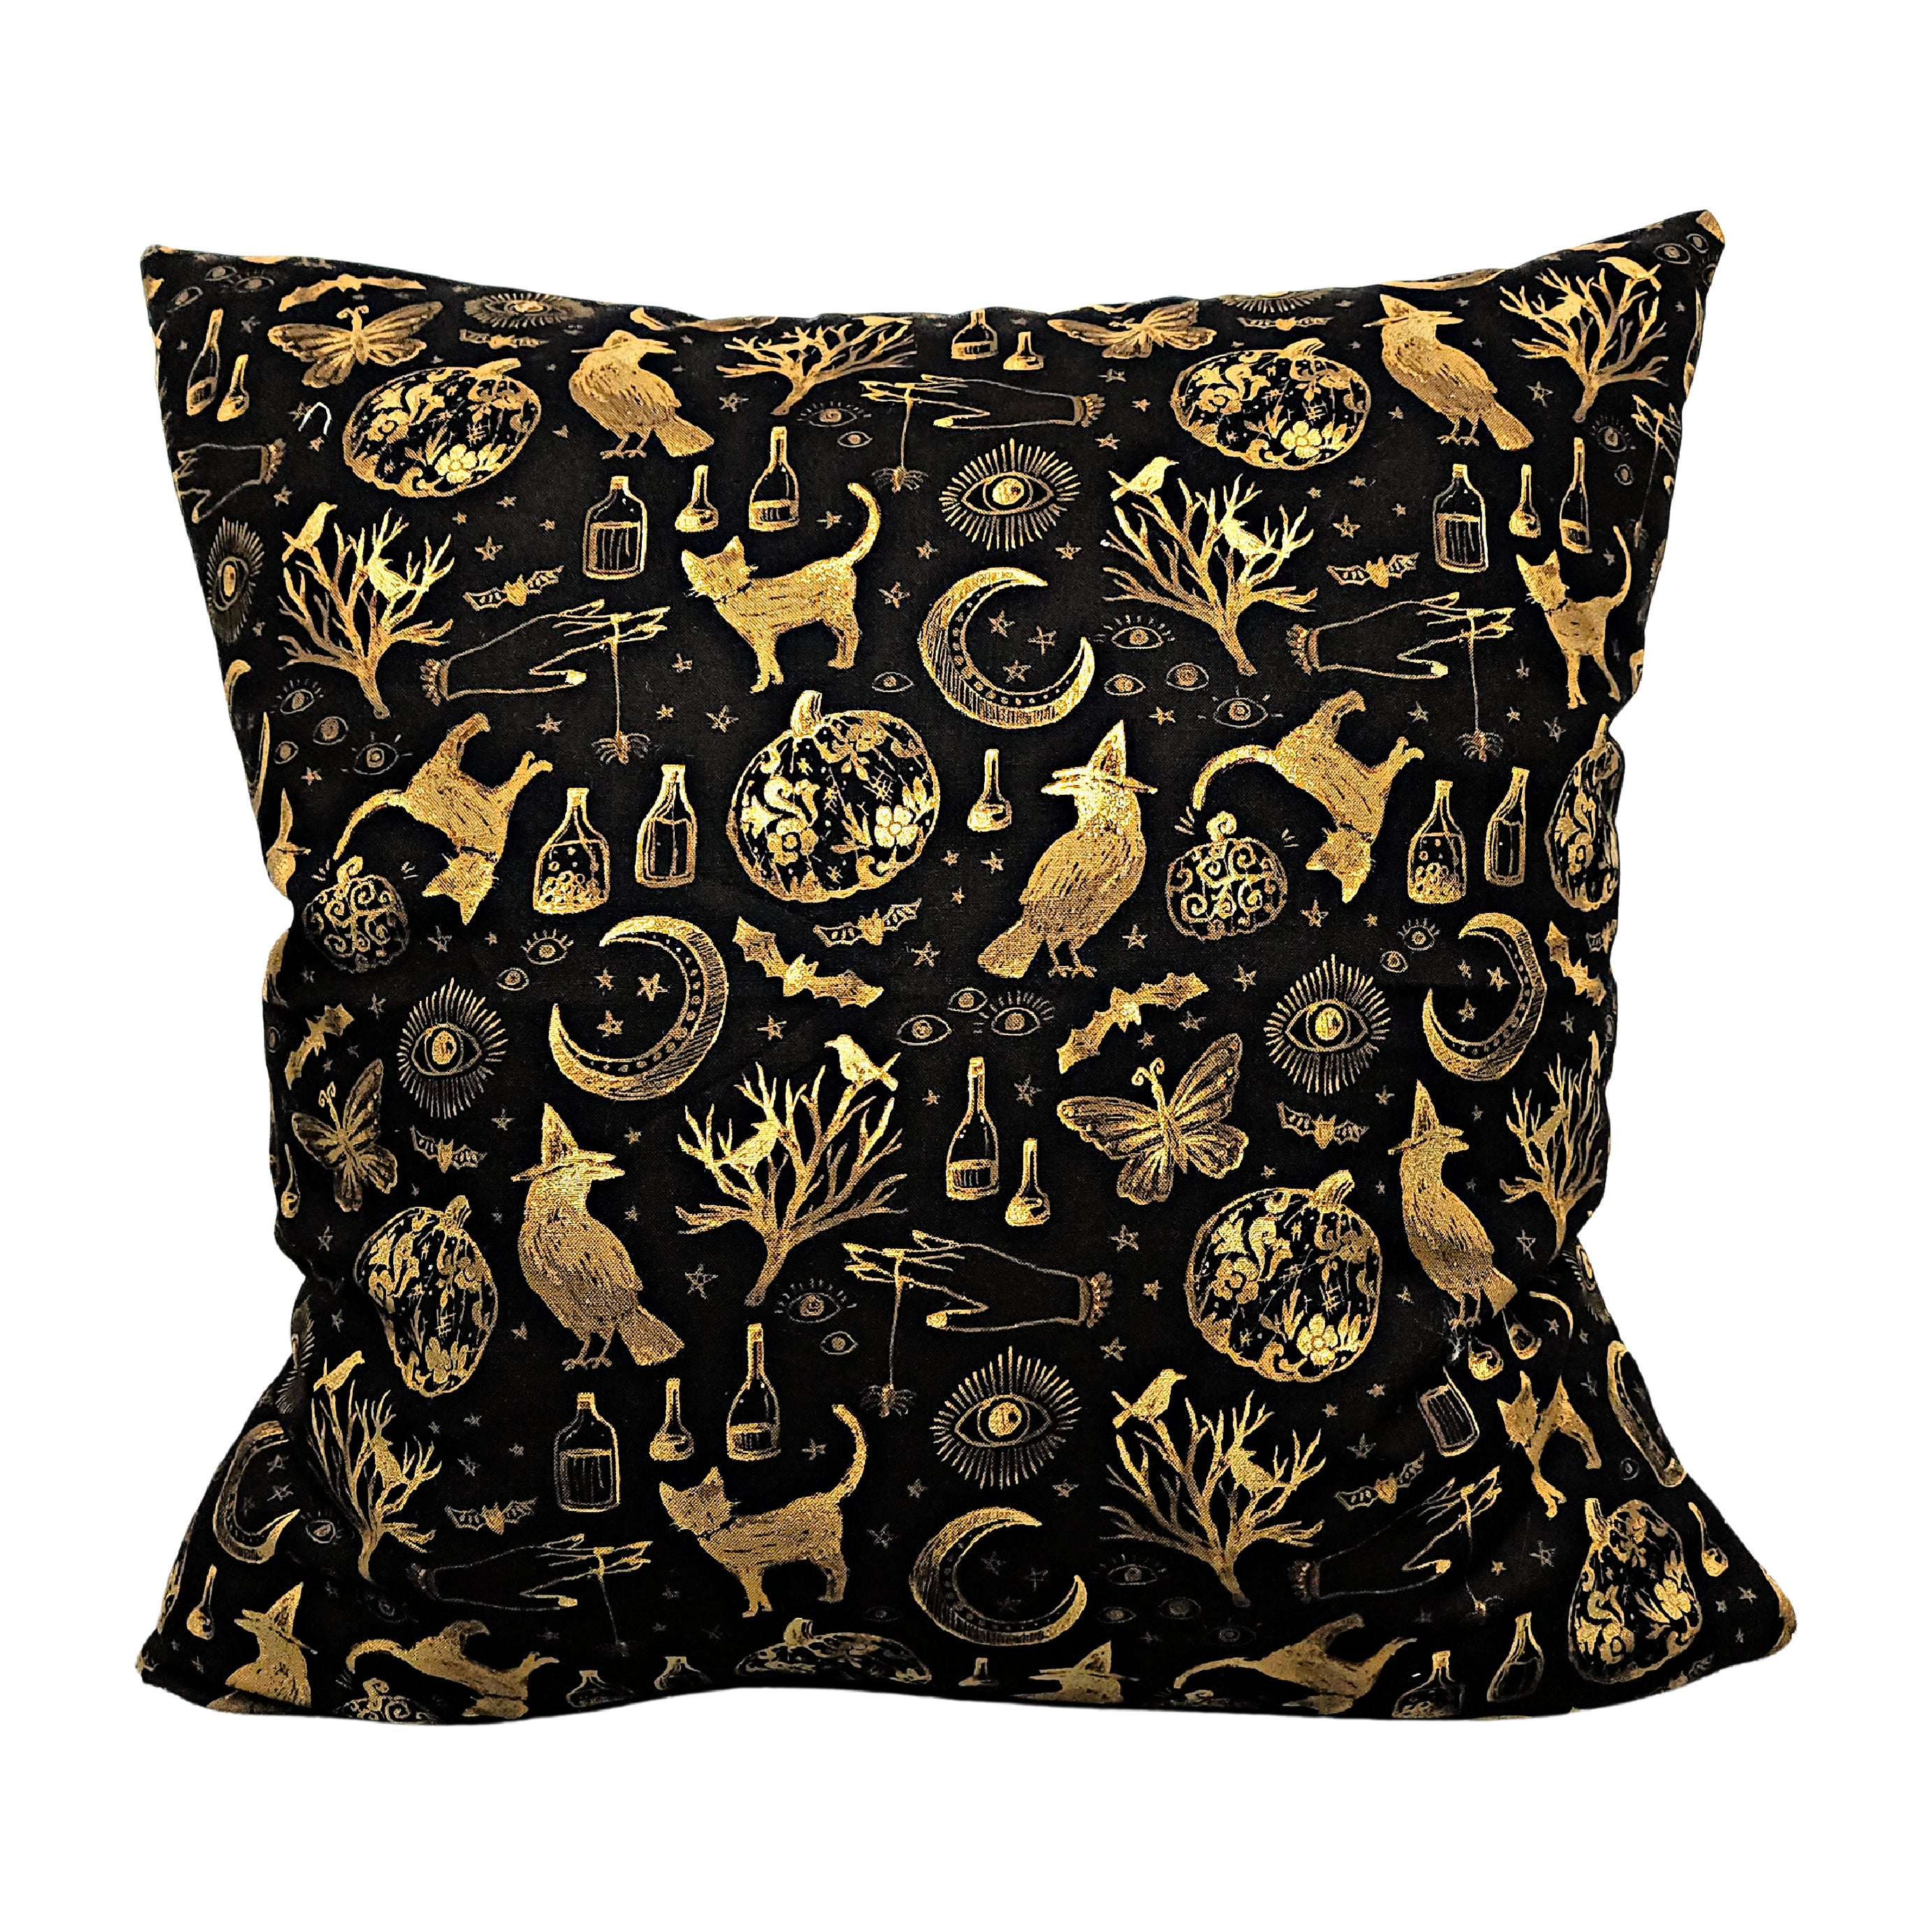 Gold and Black Magical Halloween Throw Pillow Cover, 18 x 18